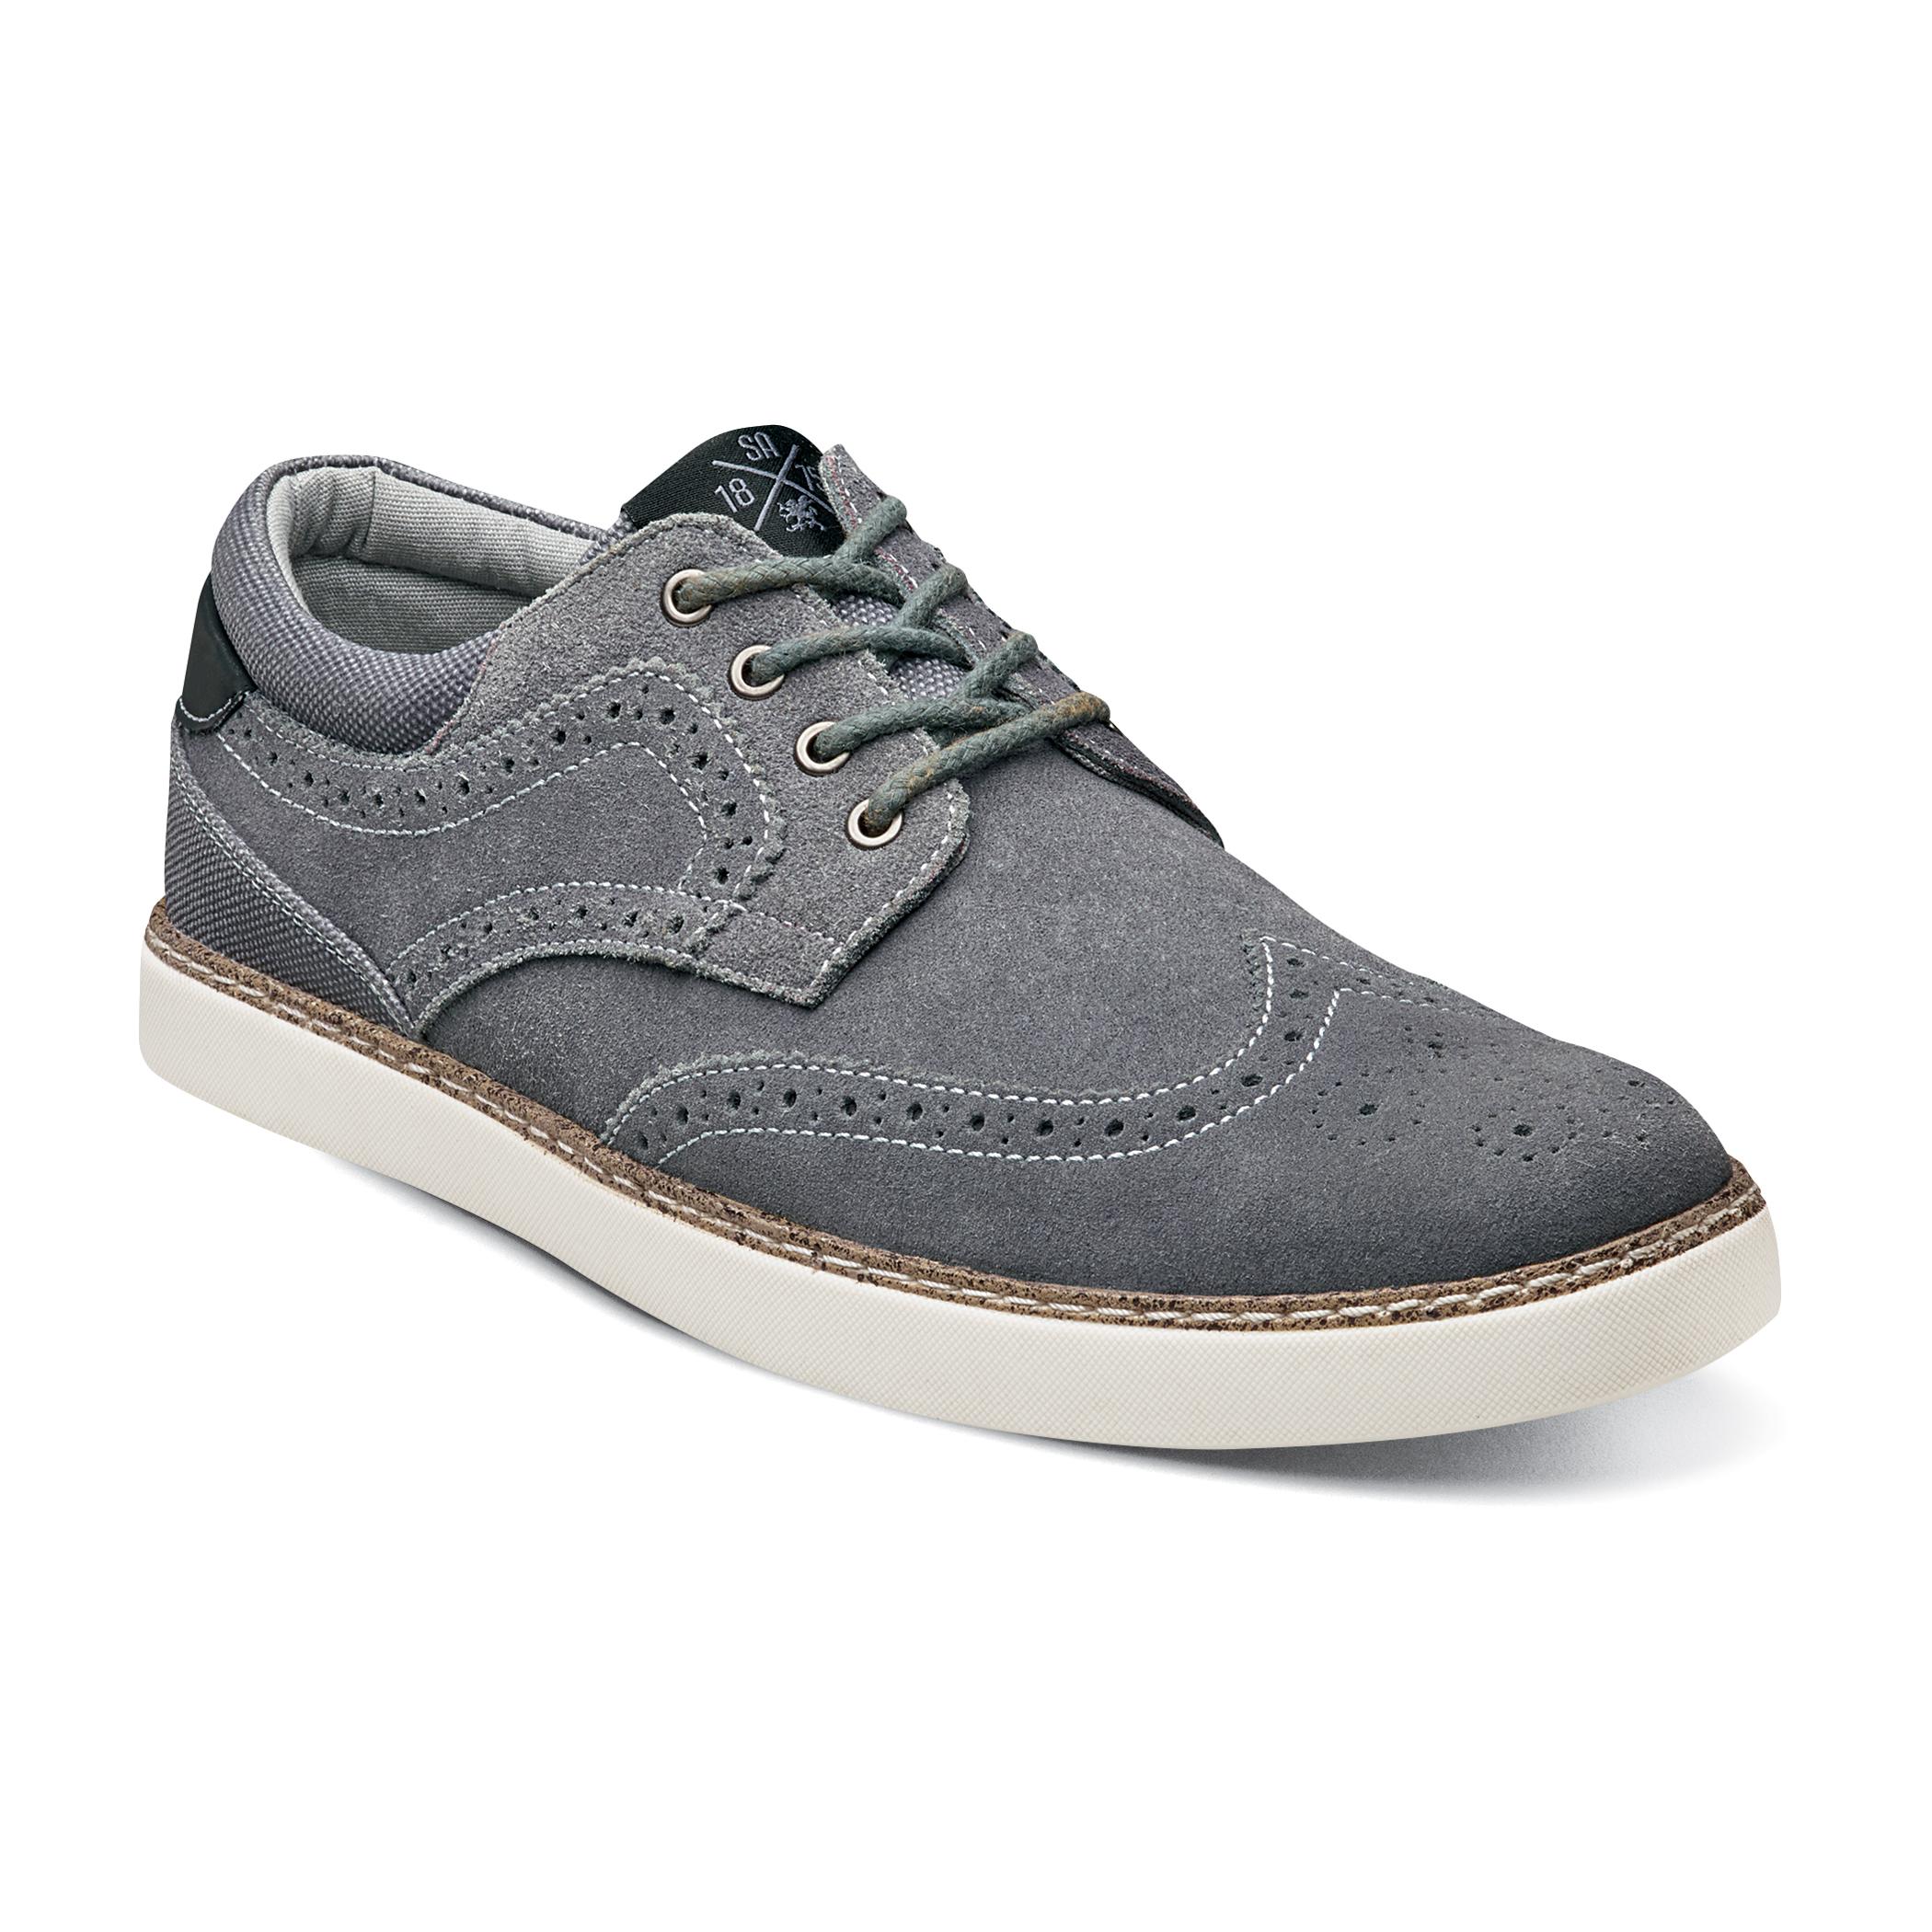 Stacy Adams Taz Gray Suede Wingtip Shoes 53416 - $74.90 :: Upscale ...